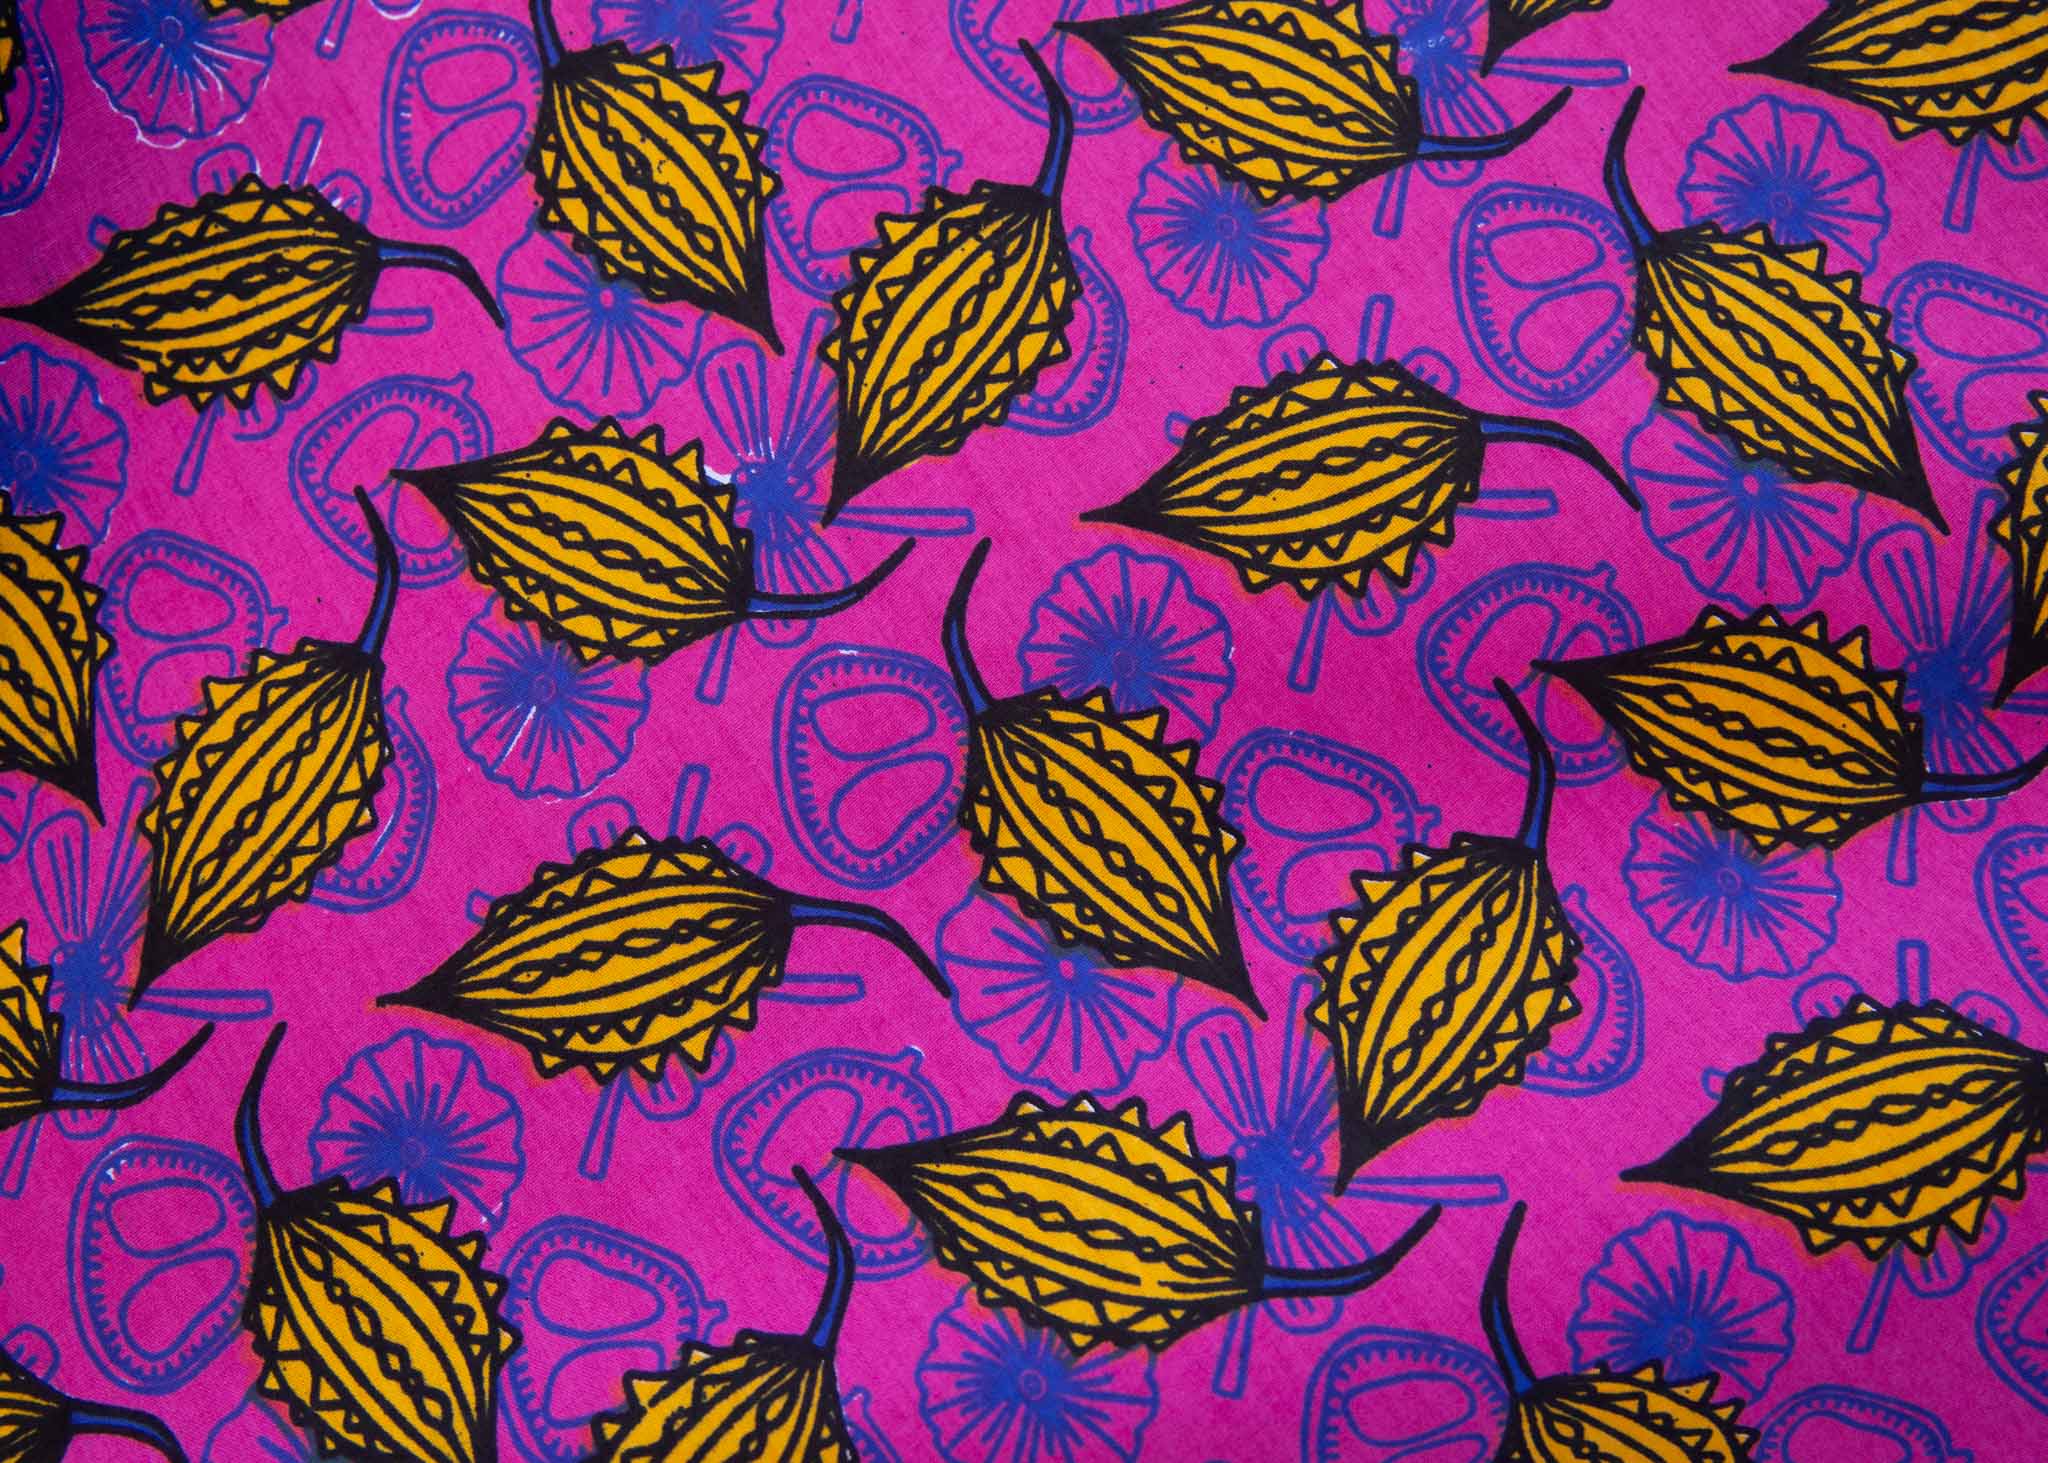 Fabric close up of yellow tamarind design over a pink background.